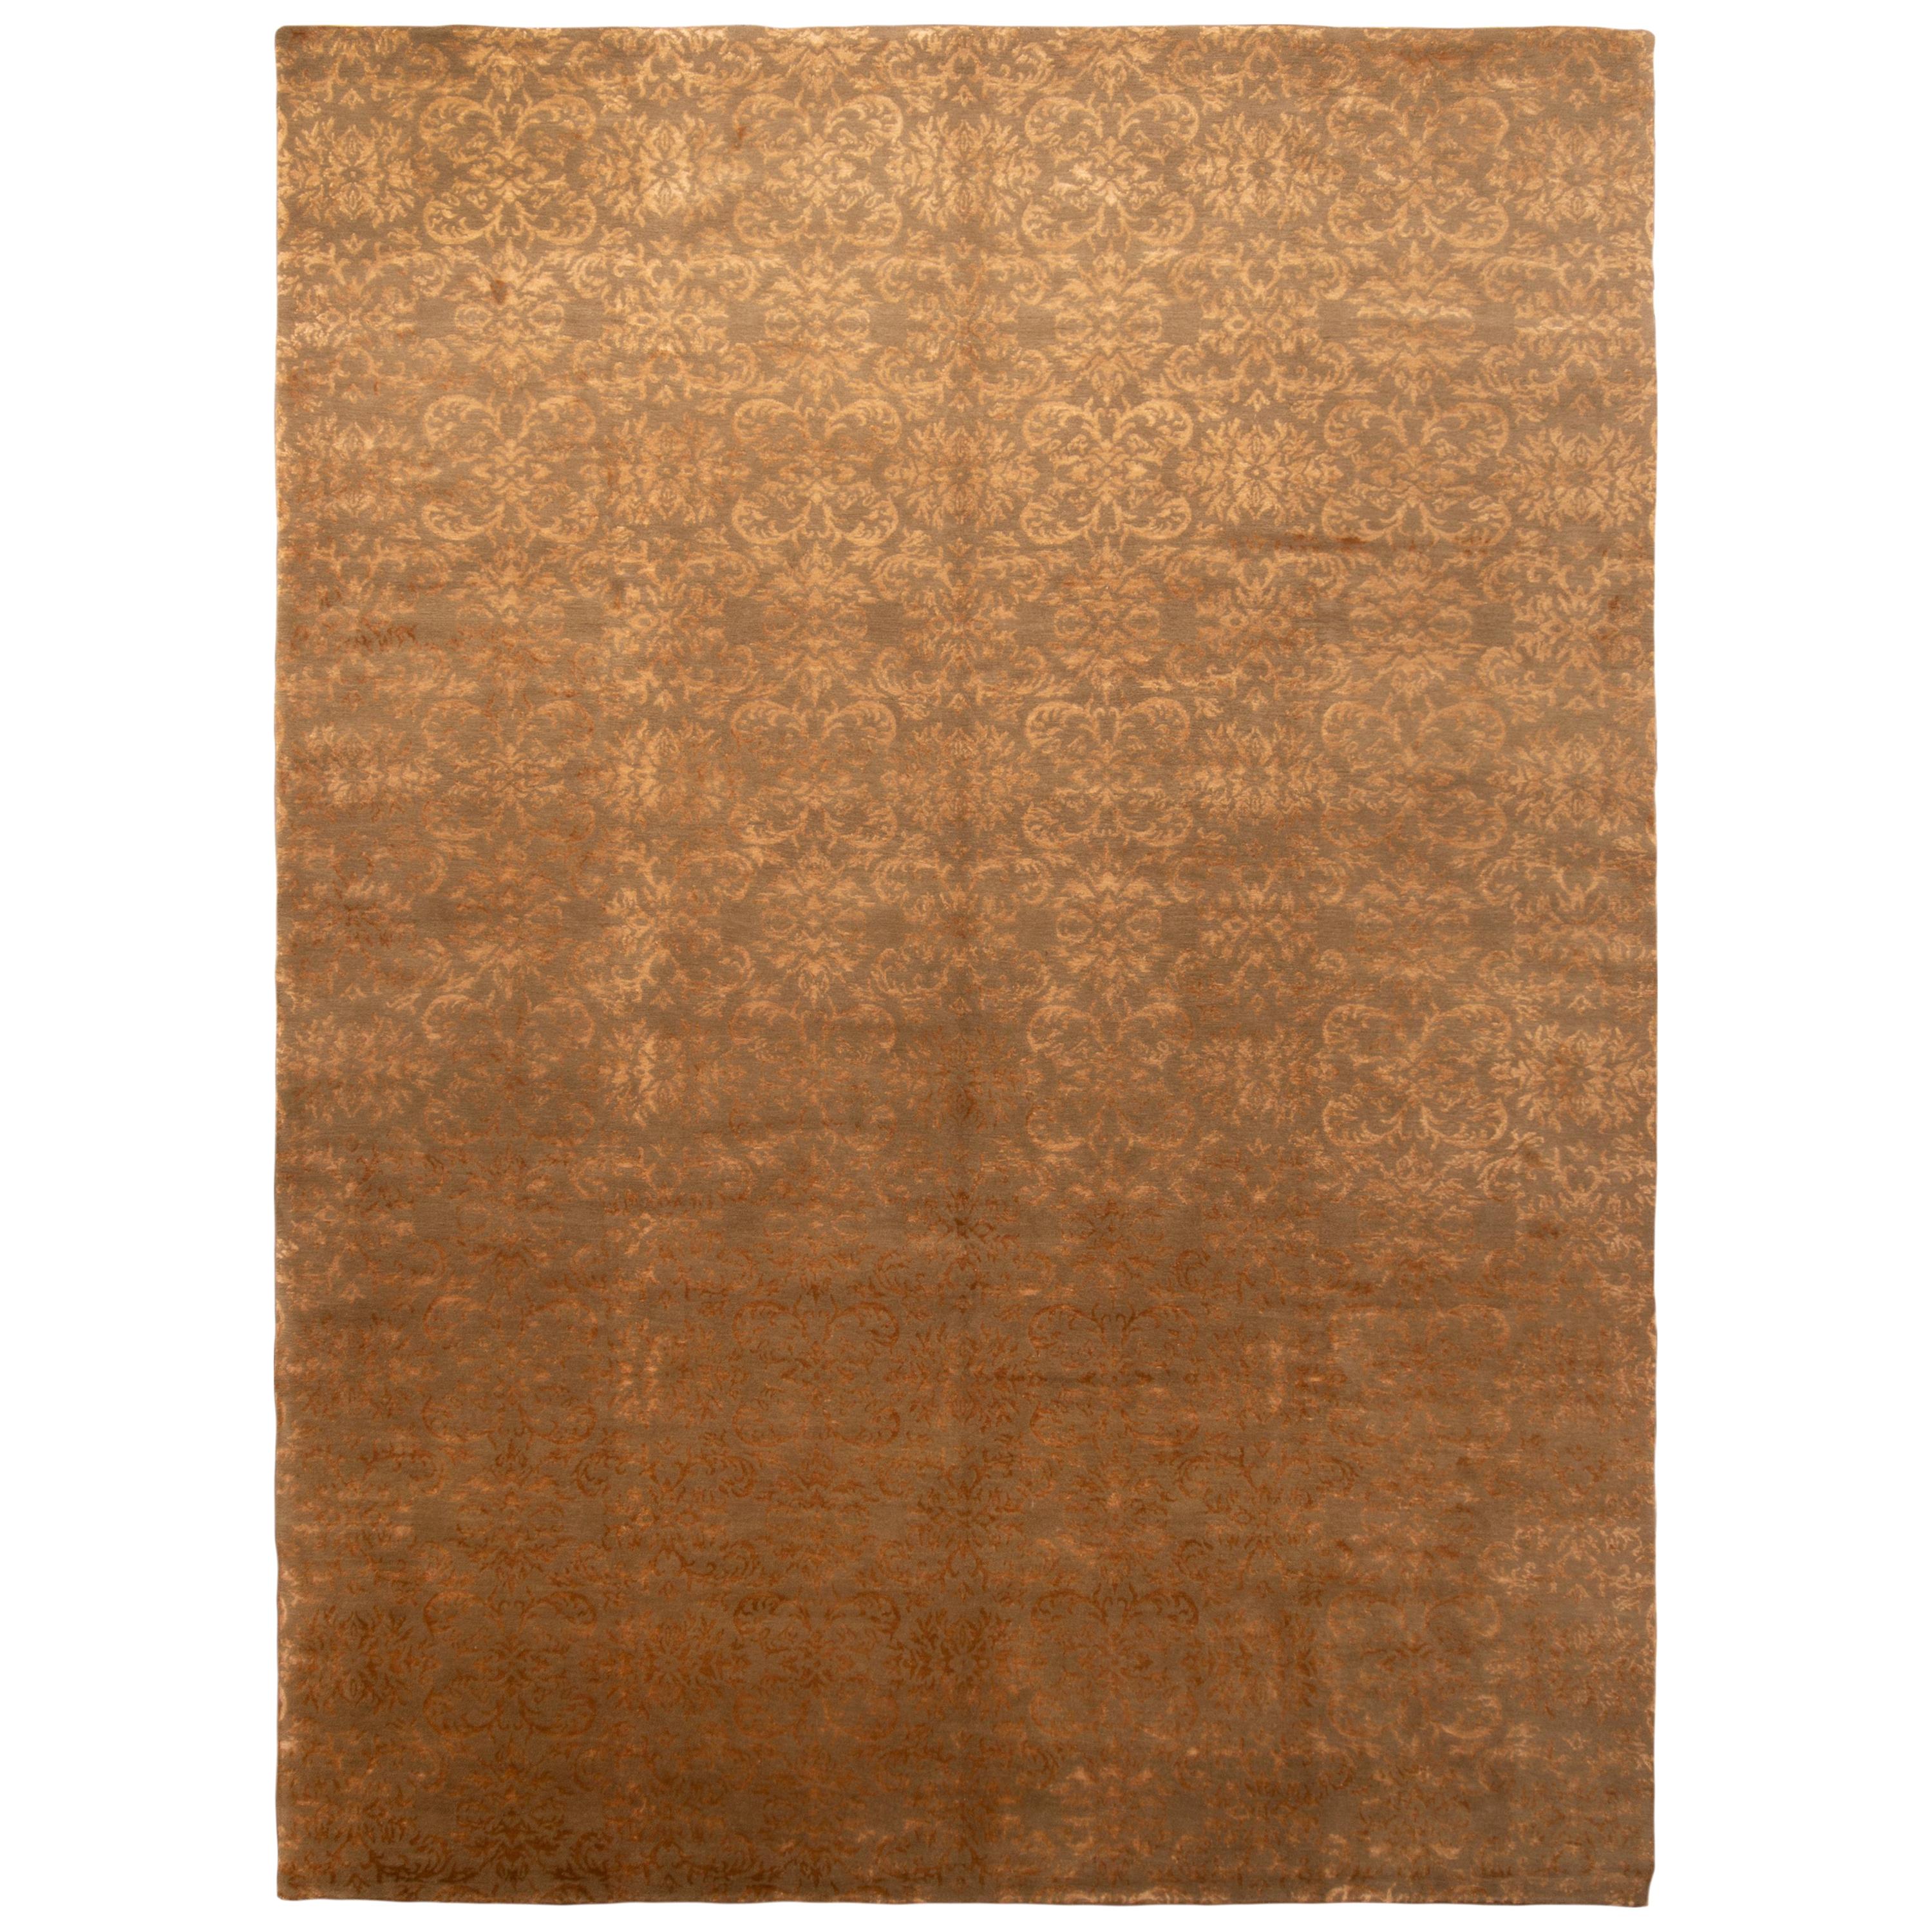 New Arabesque Gold and Brown Wool and Silk Rug